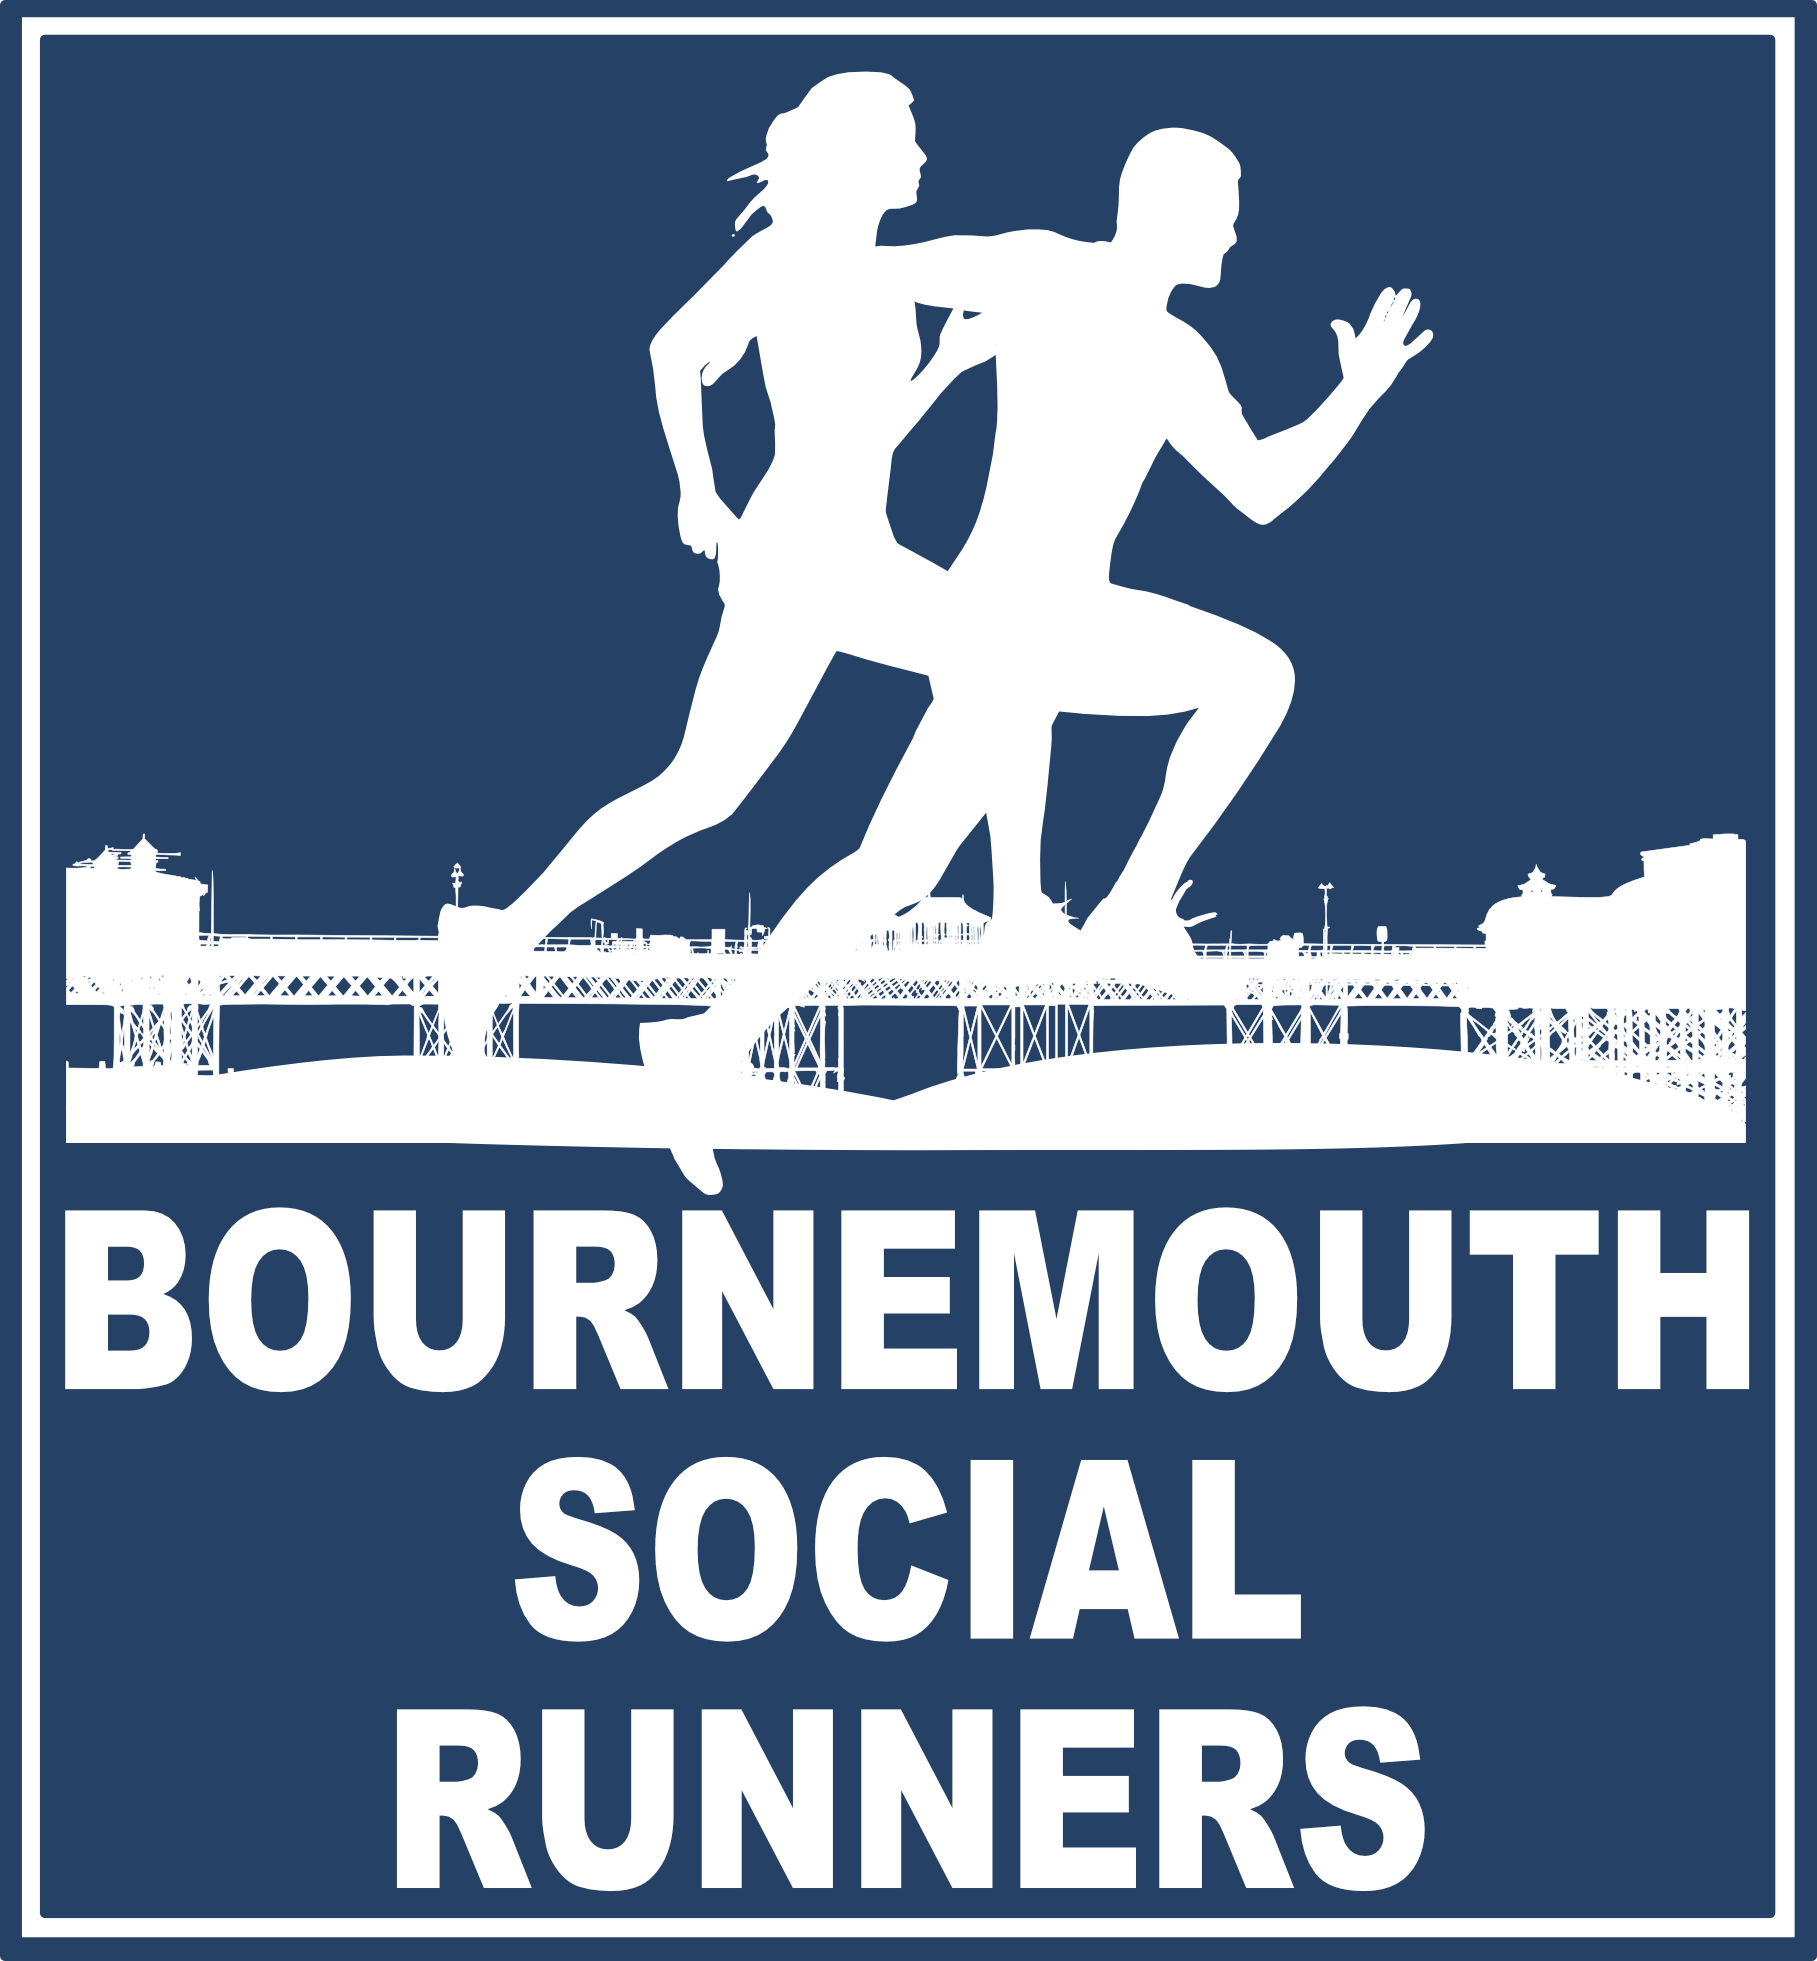 Bournemouth Social Runners Shop